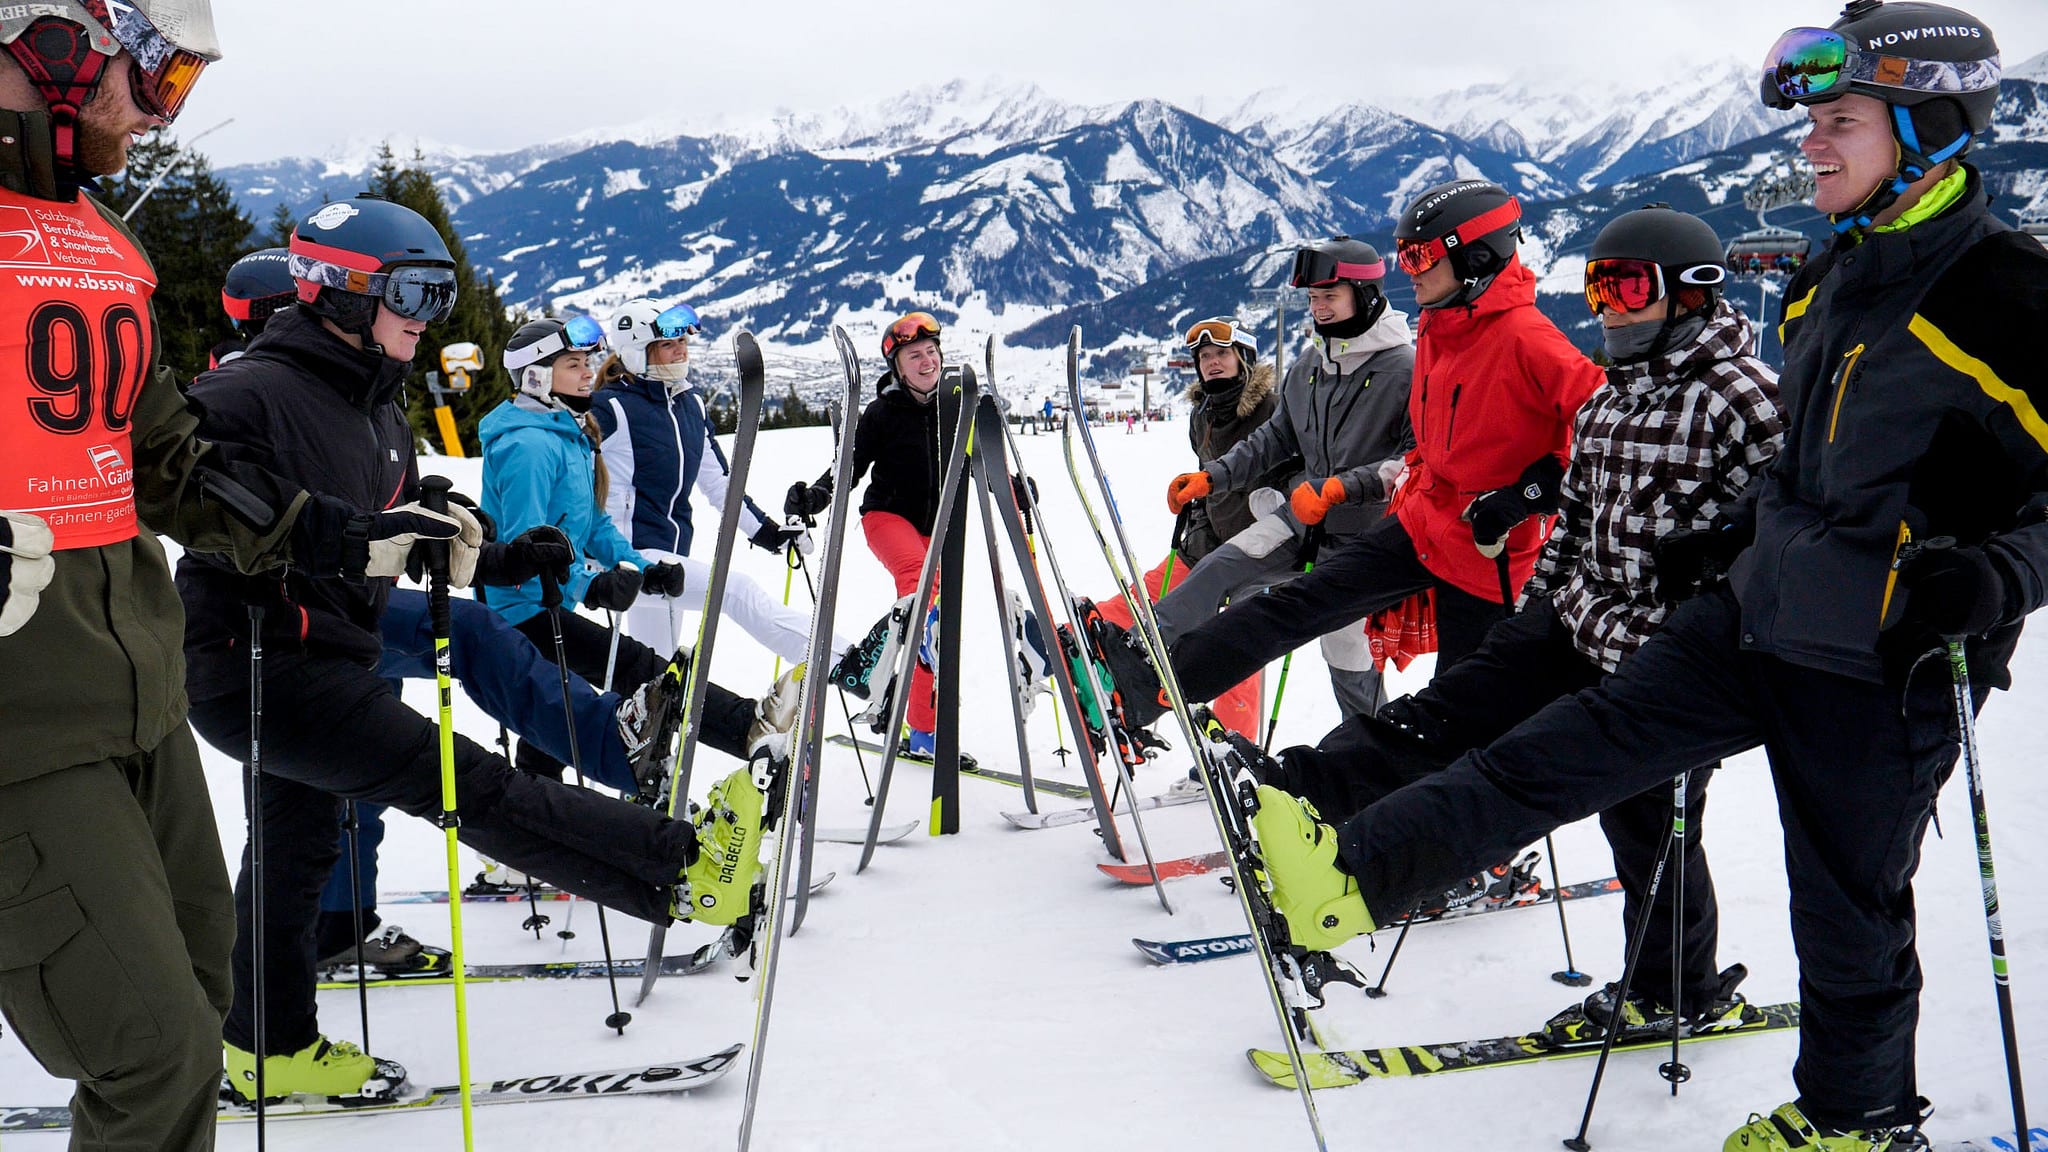 Best jobs in the snowboard industry